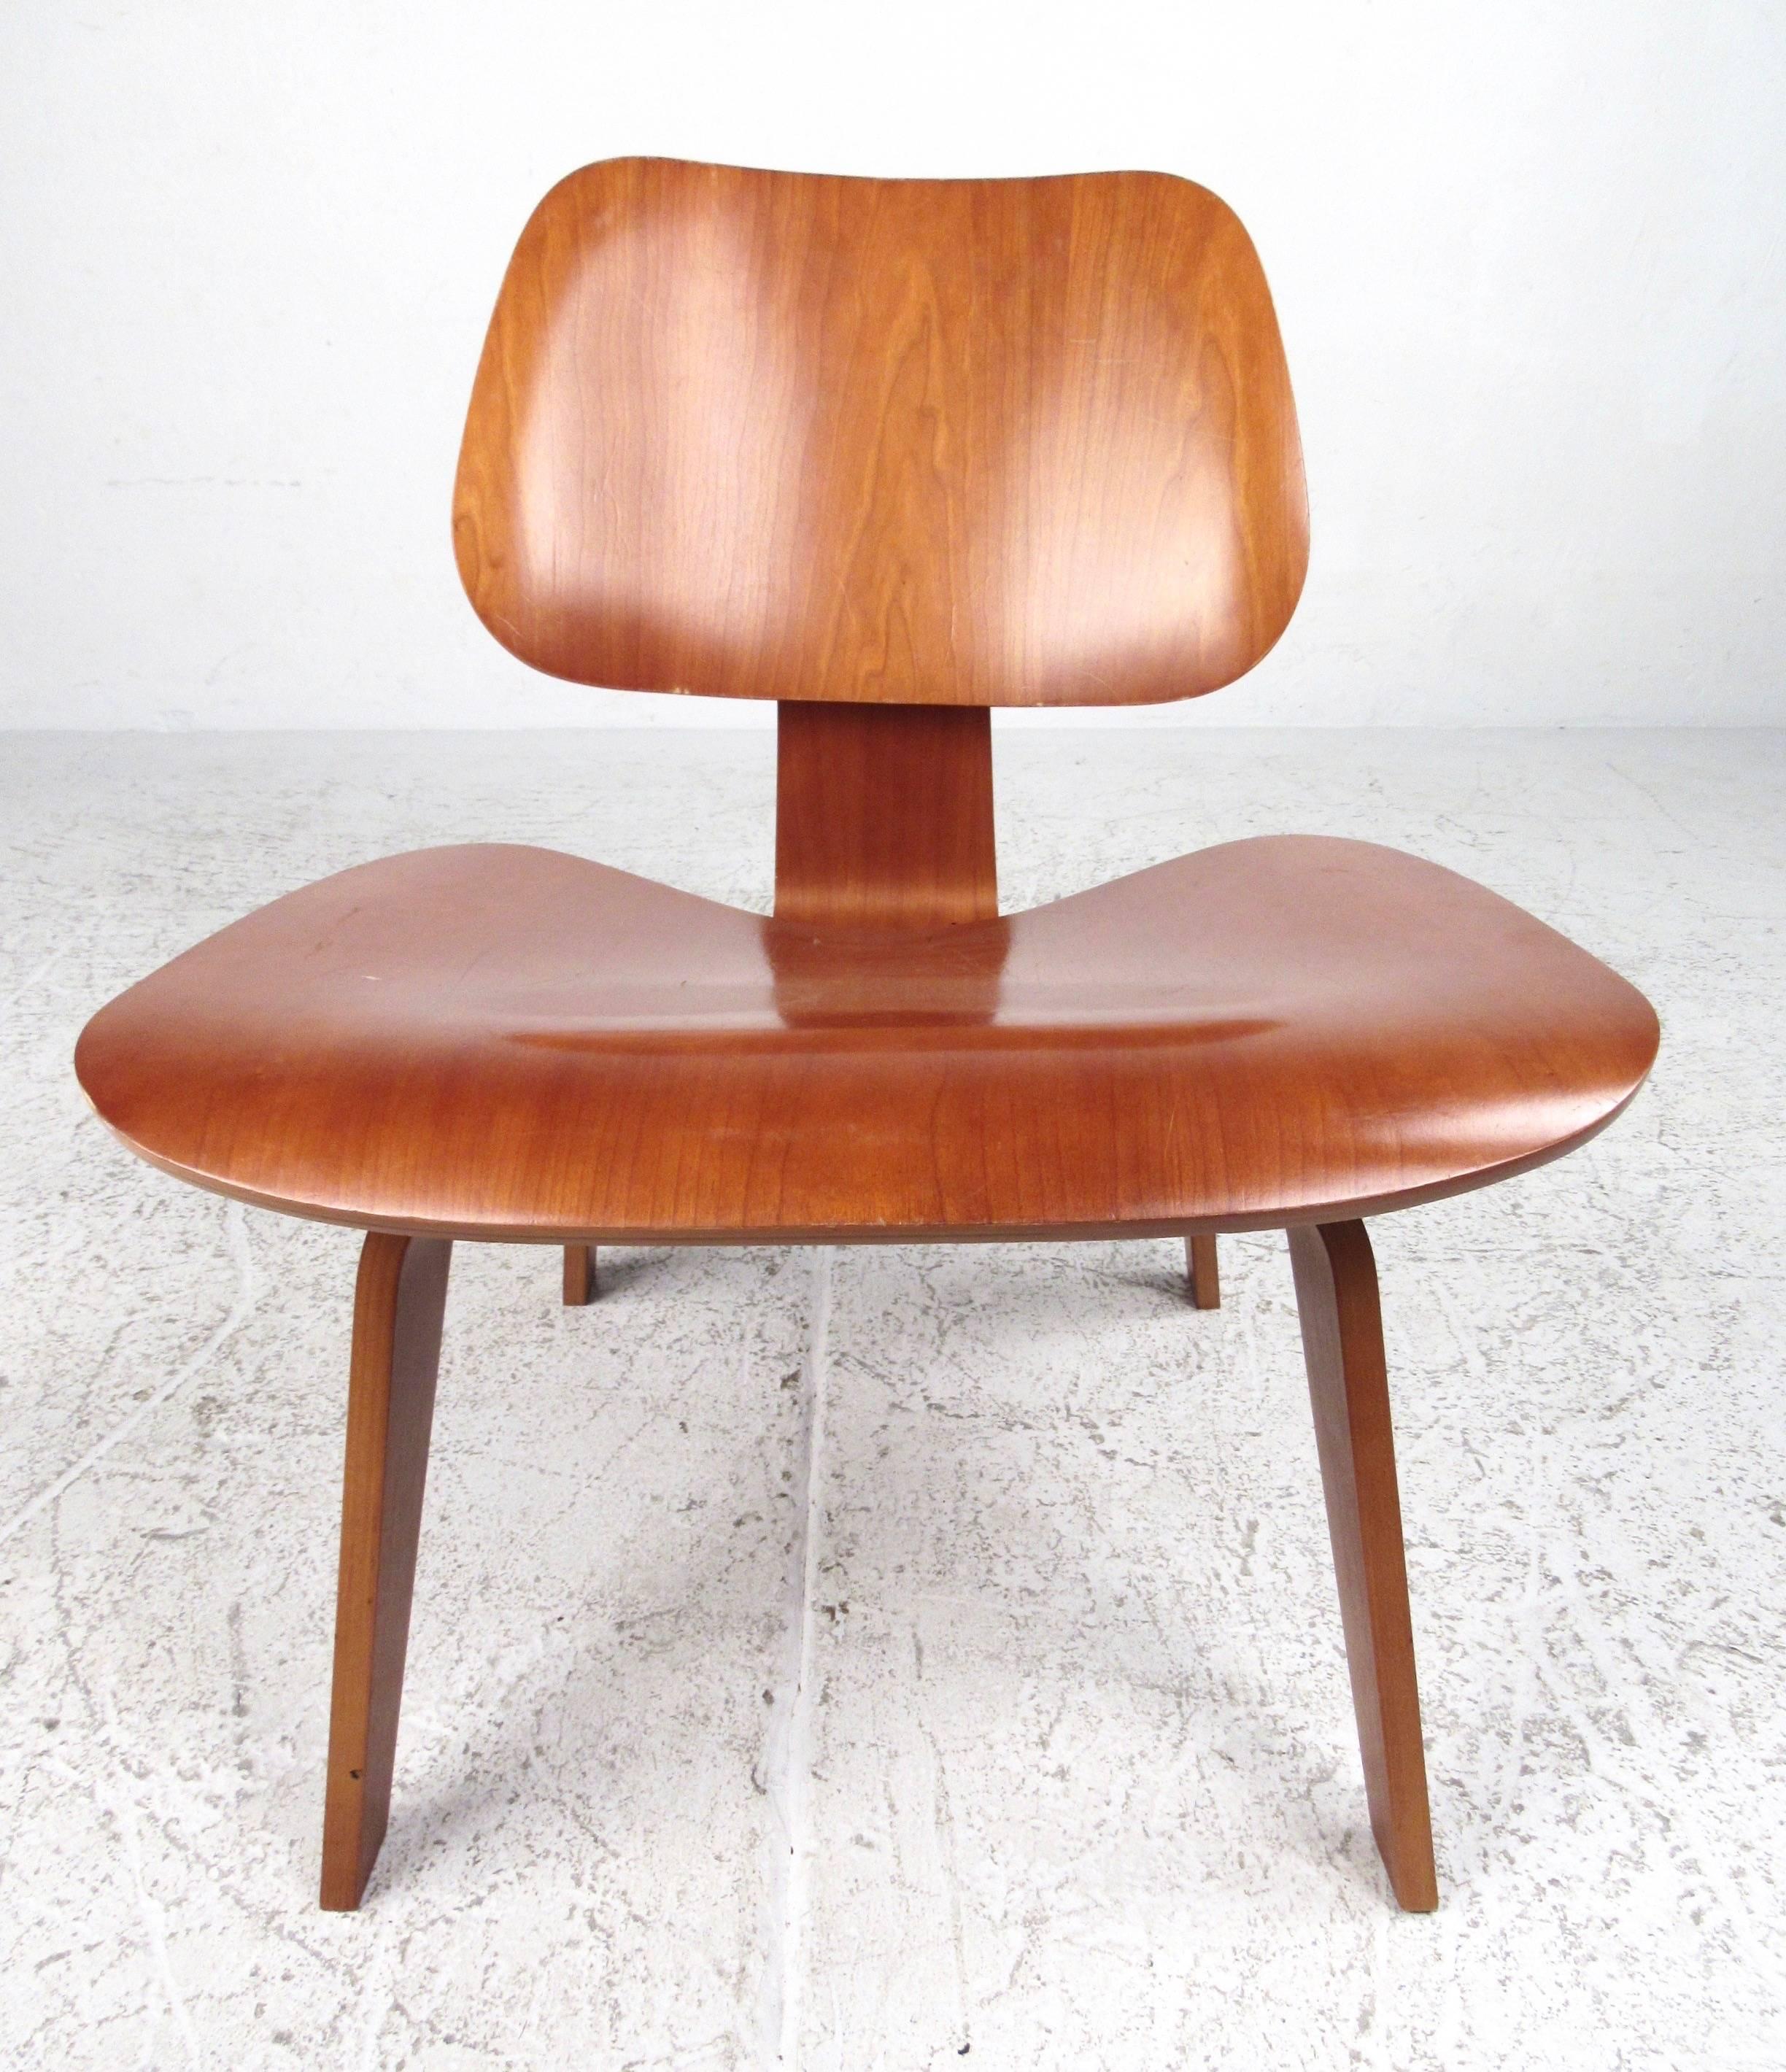 American Charles Eames Plywood DCW Side Chair for Herman Miller